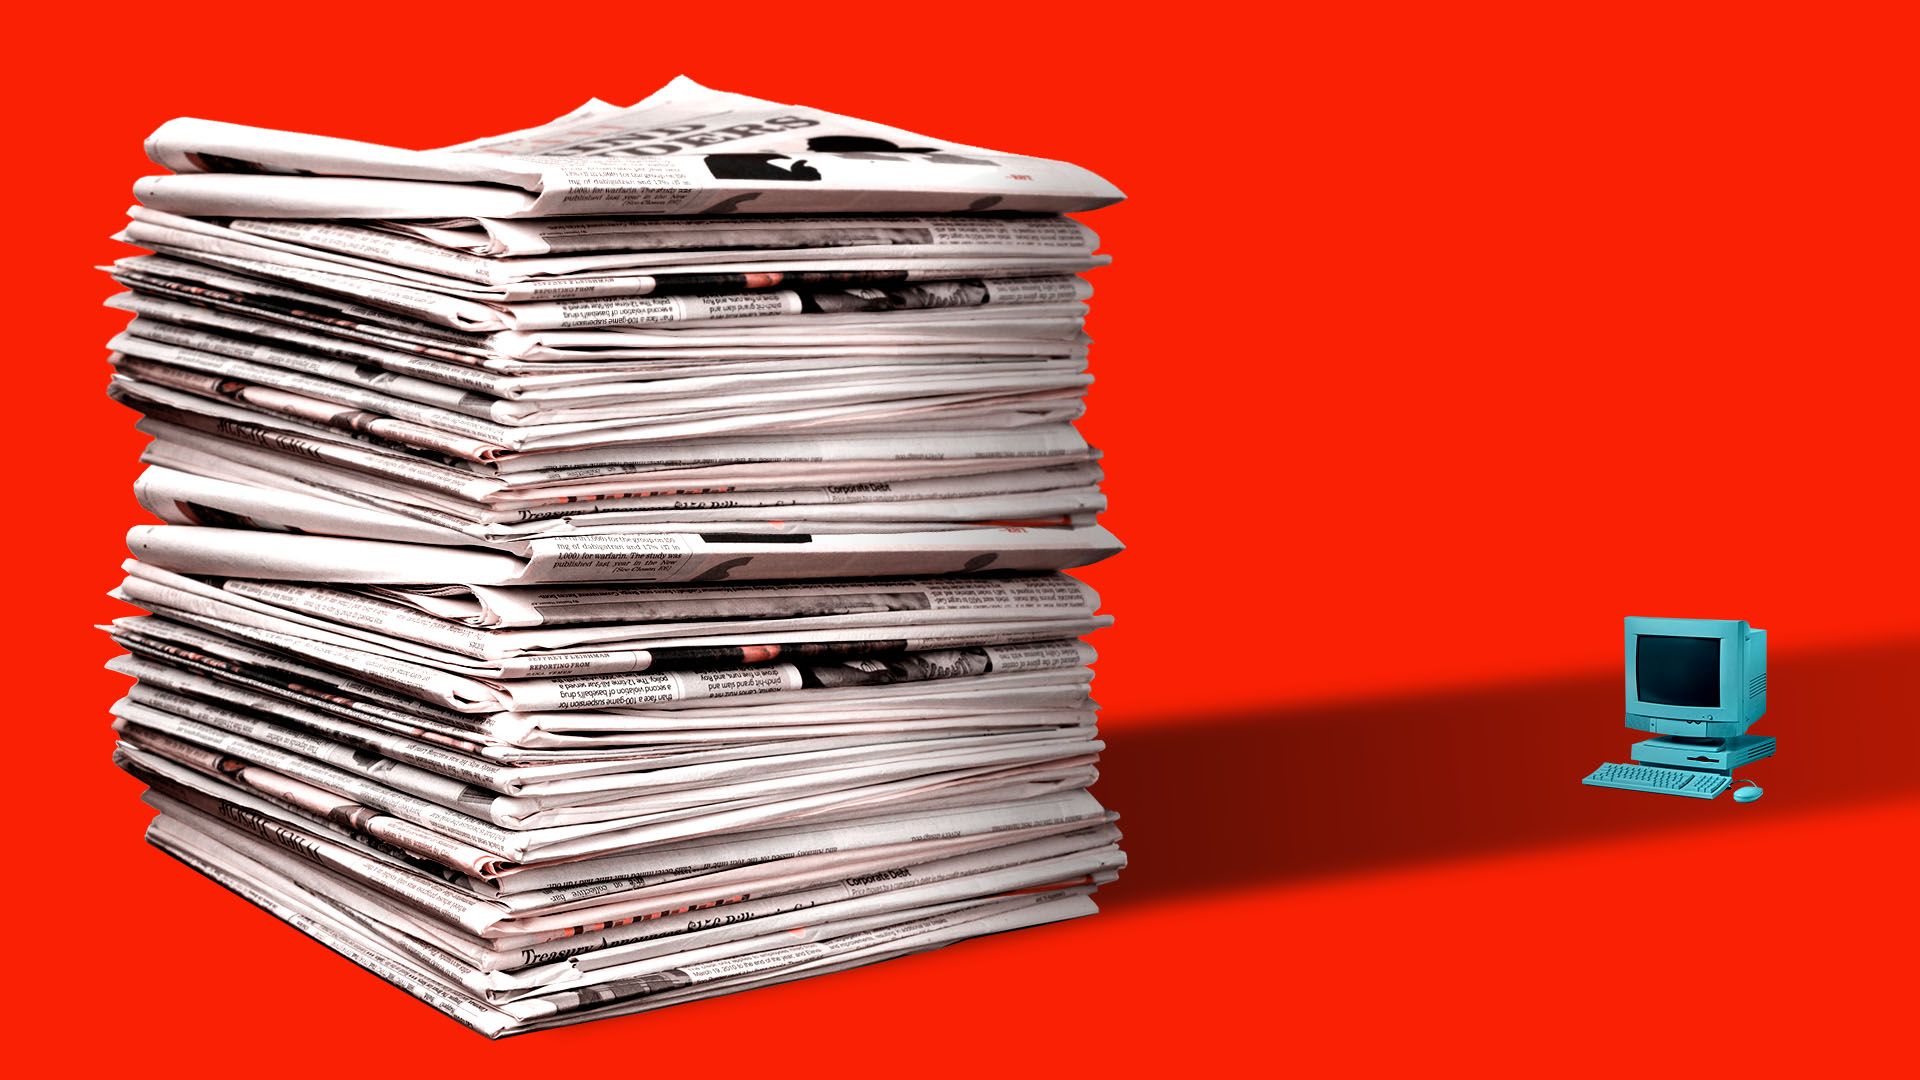  Illustration of giant stack of newspapers casting a shadow on a small computer